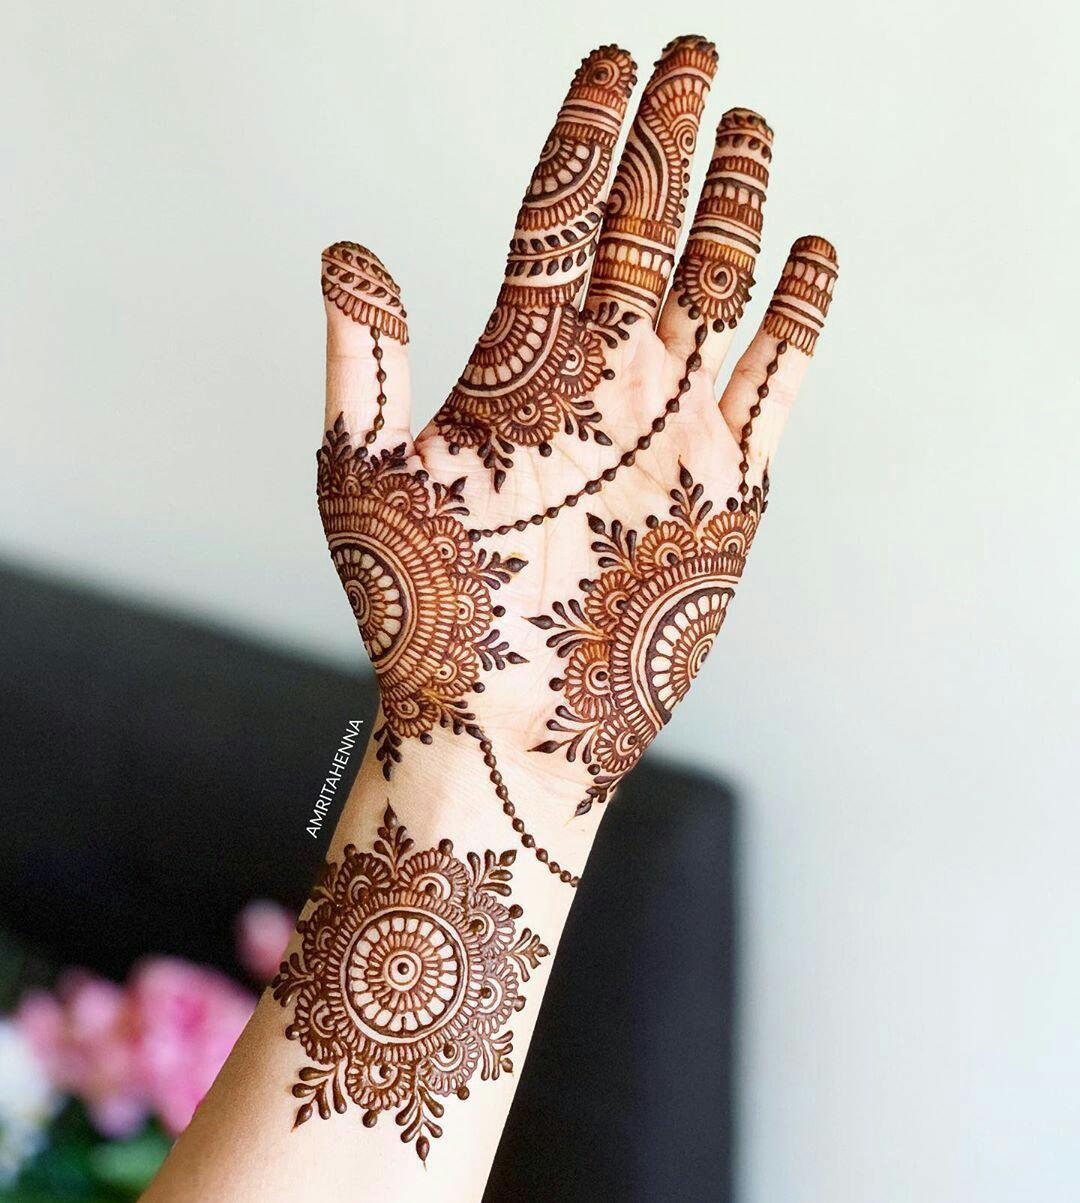 25+ Front Hand Mehndi Design Ideas to Steal your Heart! - Tikli